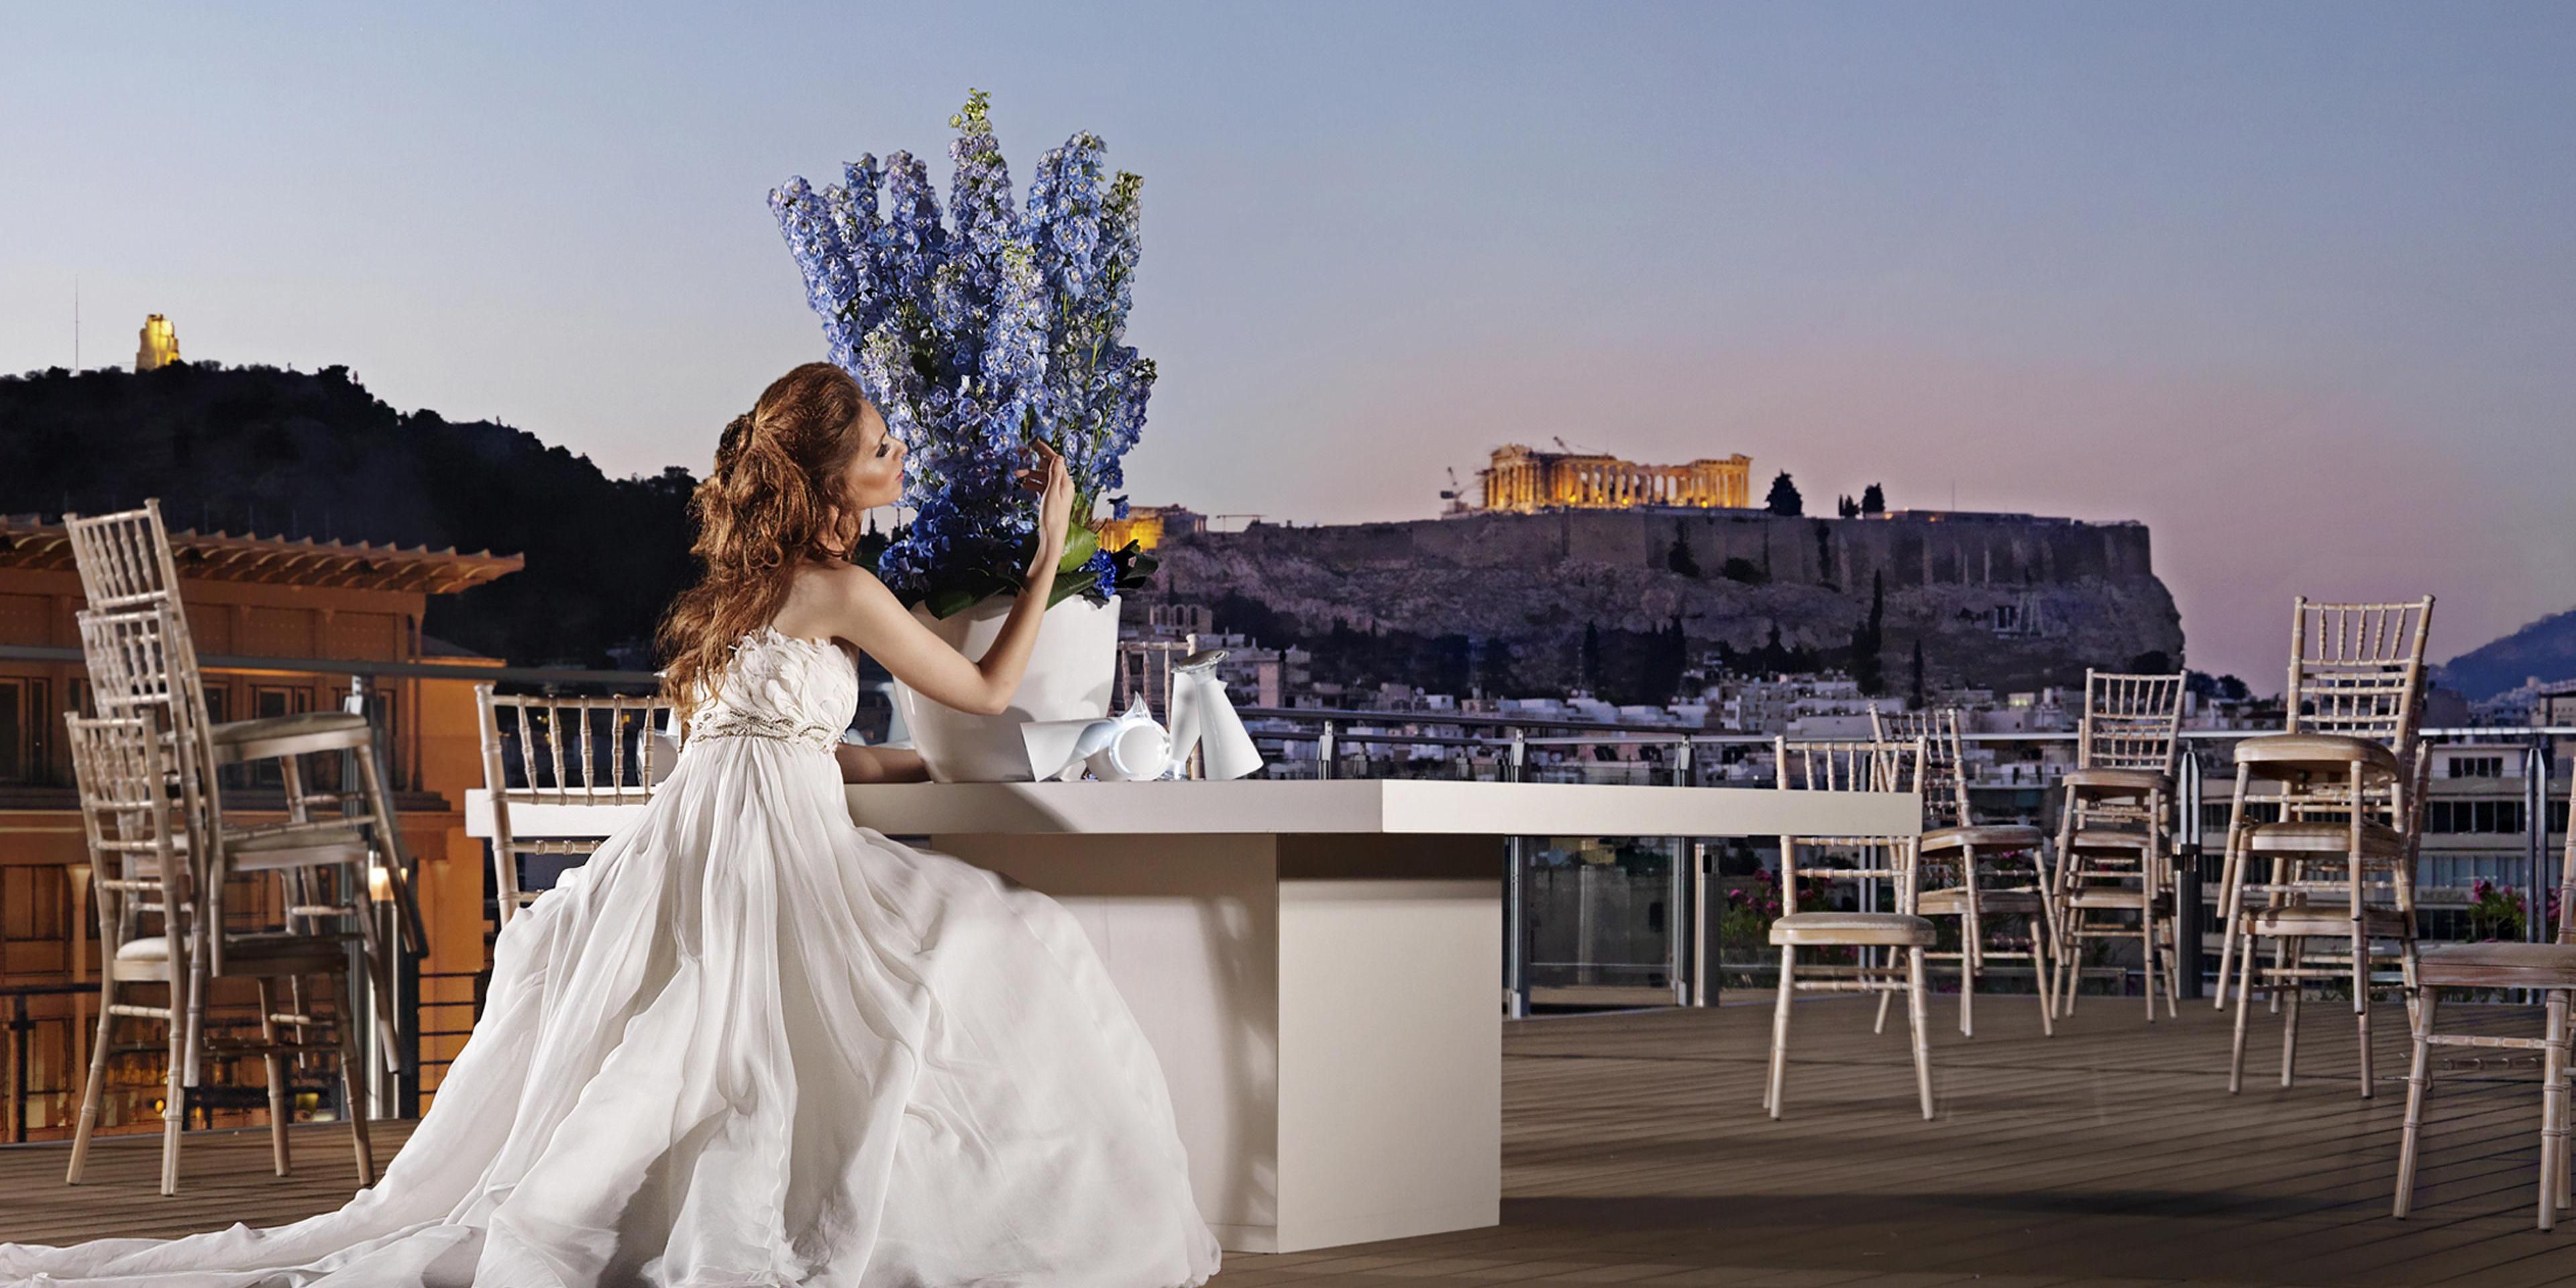 The Acropolis Terrace, with its hardwood deck, marble benches and surrounding small garden replete with fruit trees and Mediterranean shrubs, unfolds the beauty of the city before visitors: the hustle and bustle of the day, counterbalanced by the dazzling views of the Acropolis!